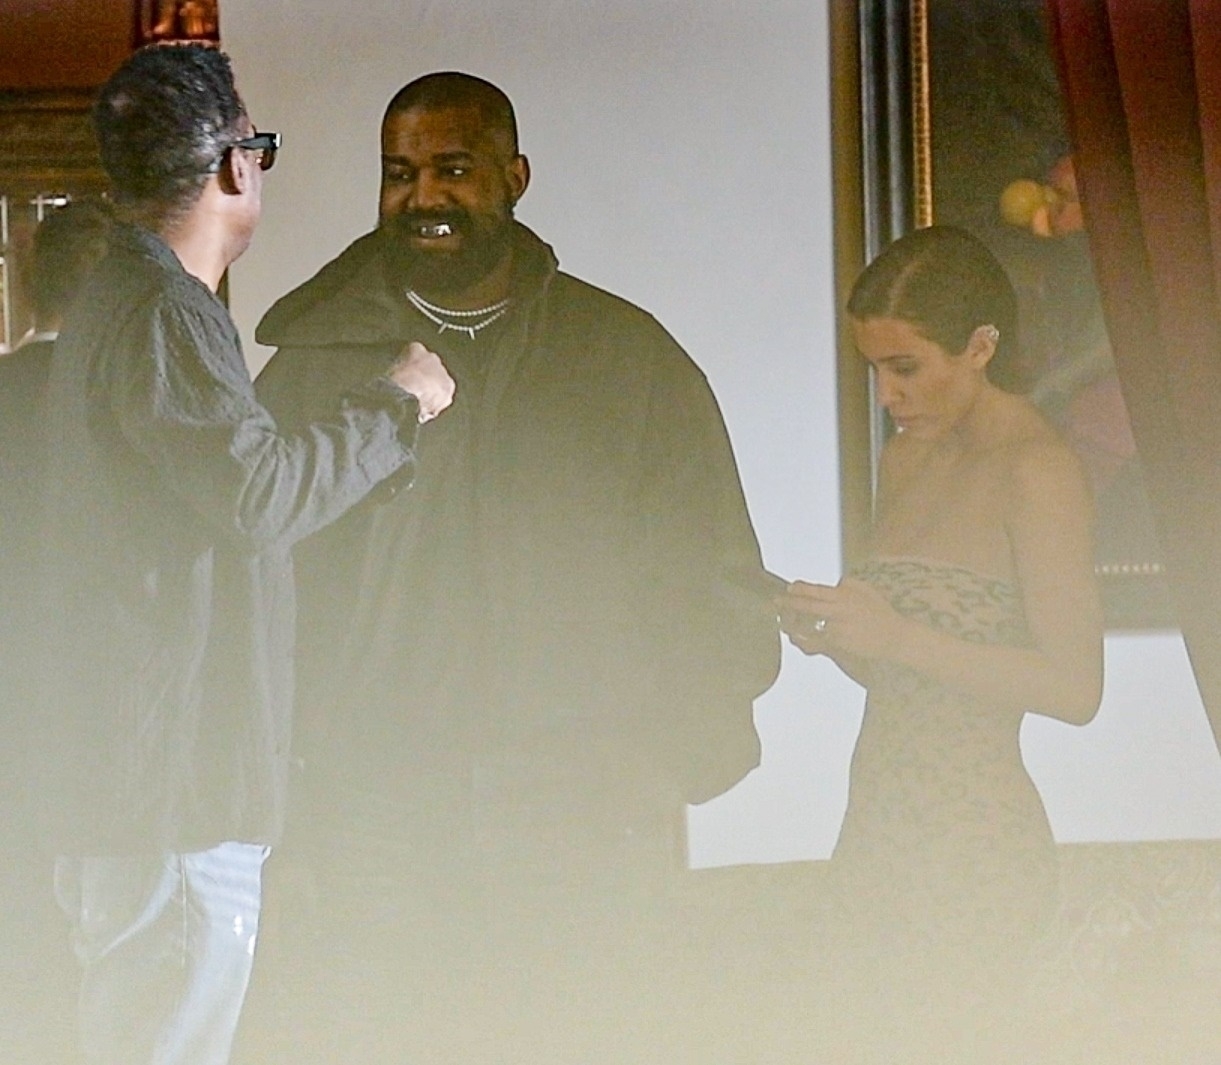 Kanye was with his wife, Bianca, and comedian Chris Rock